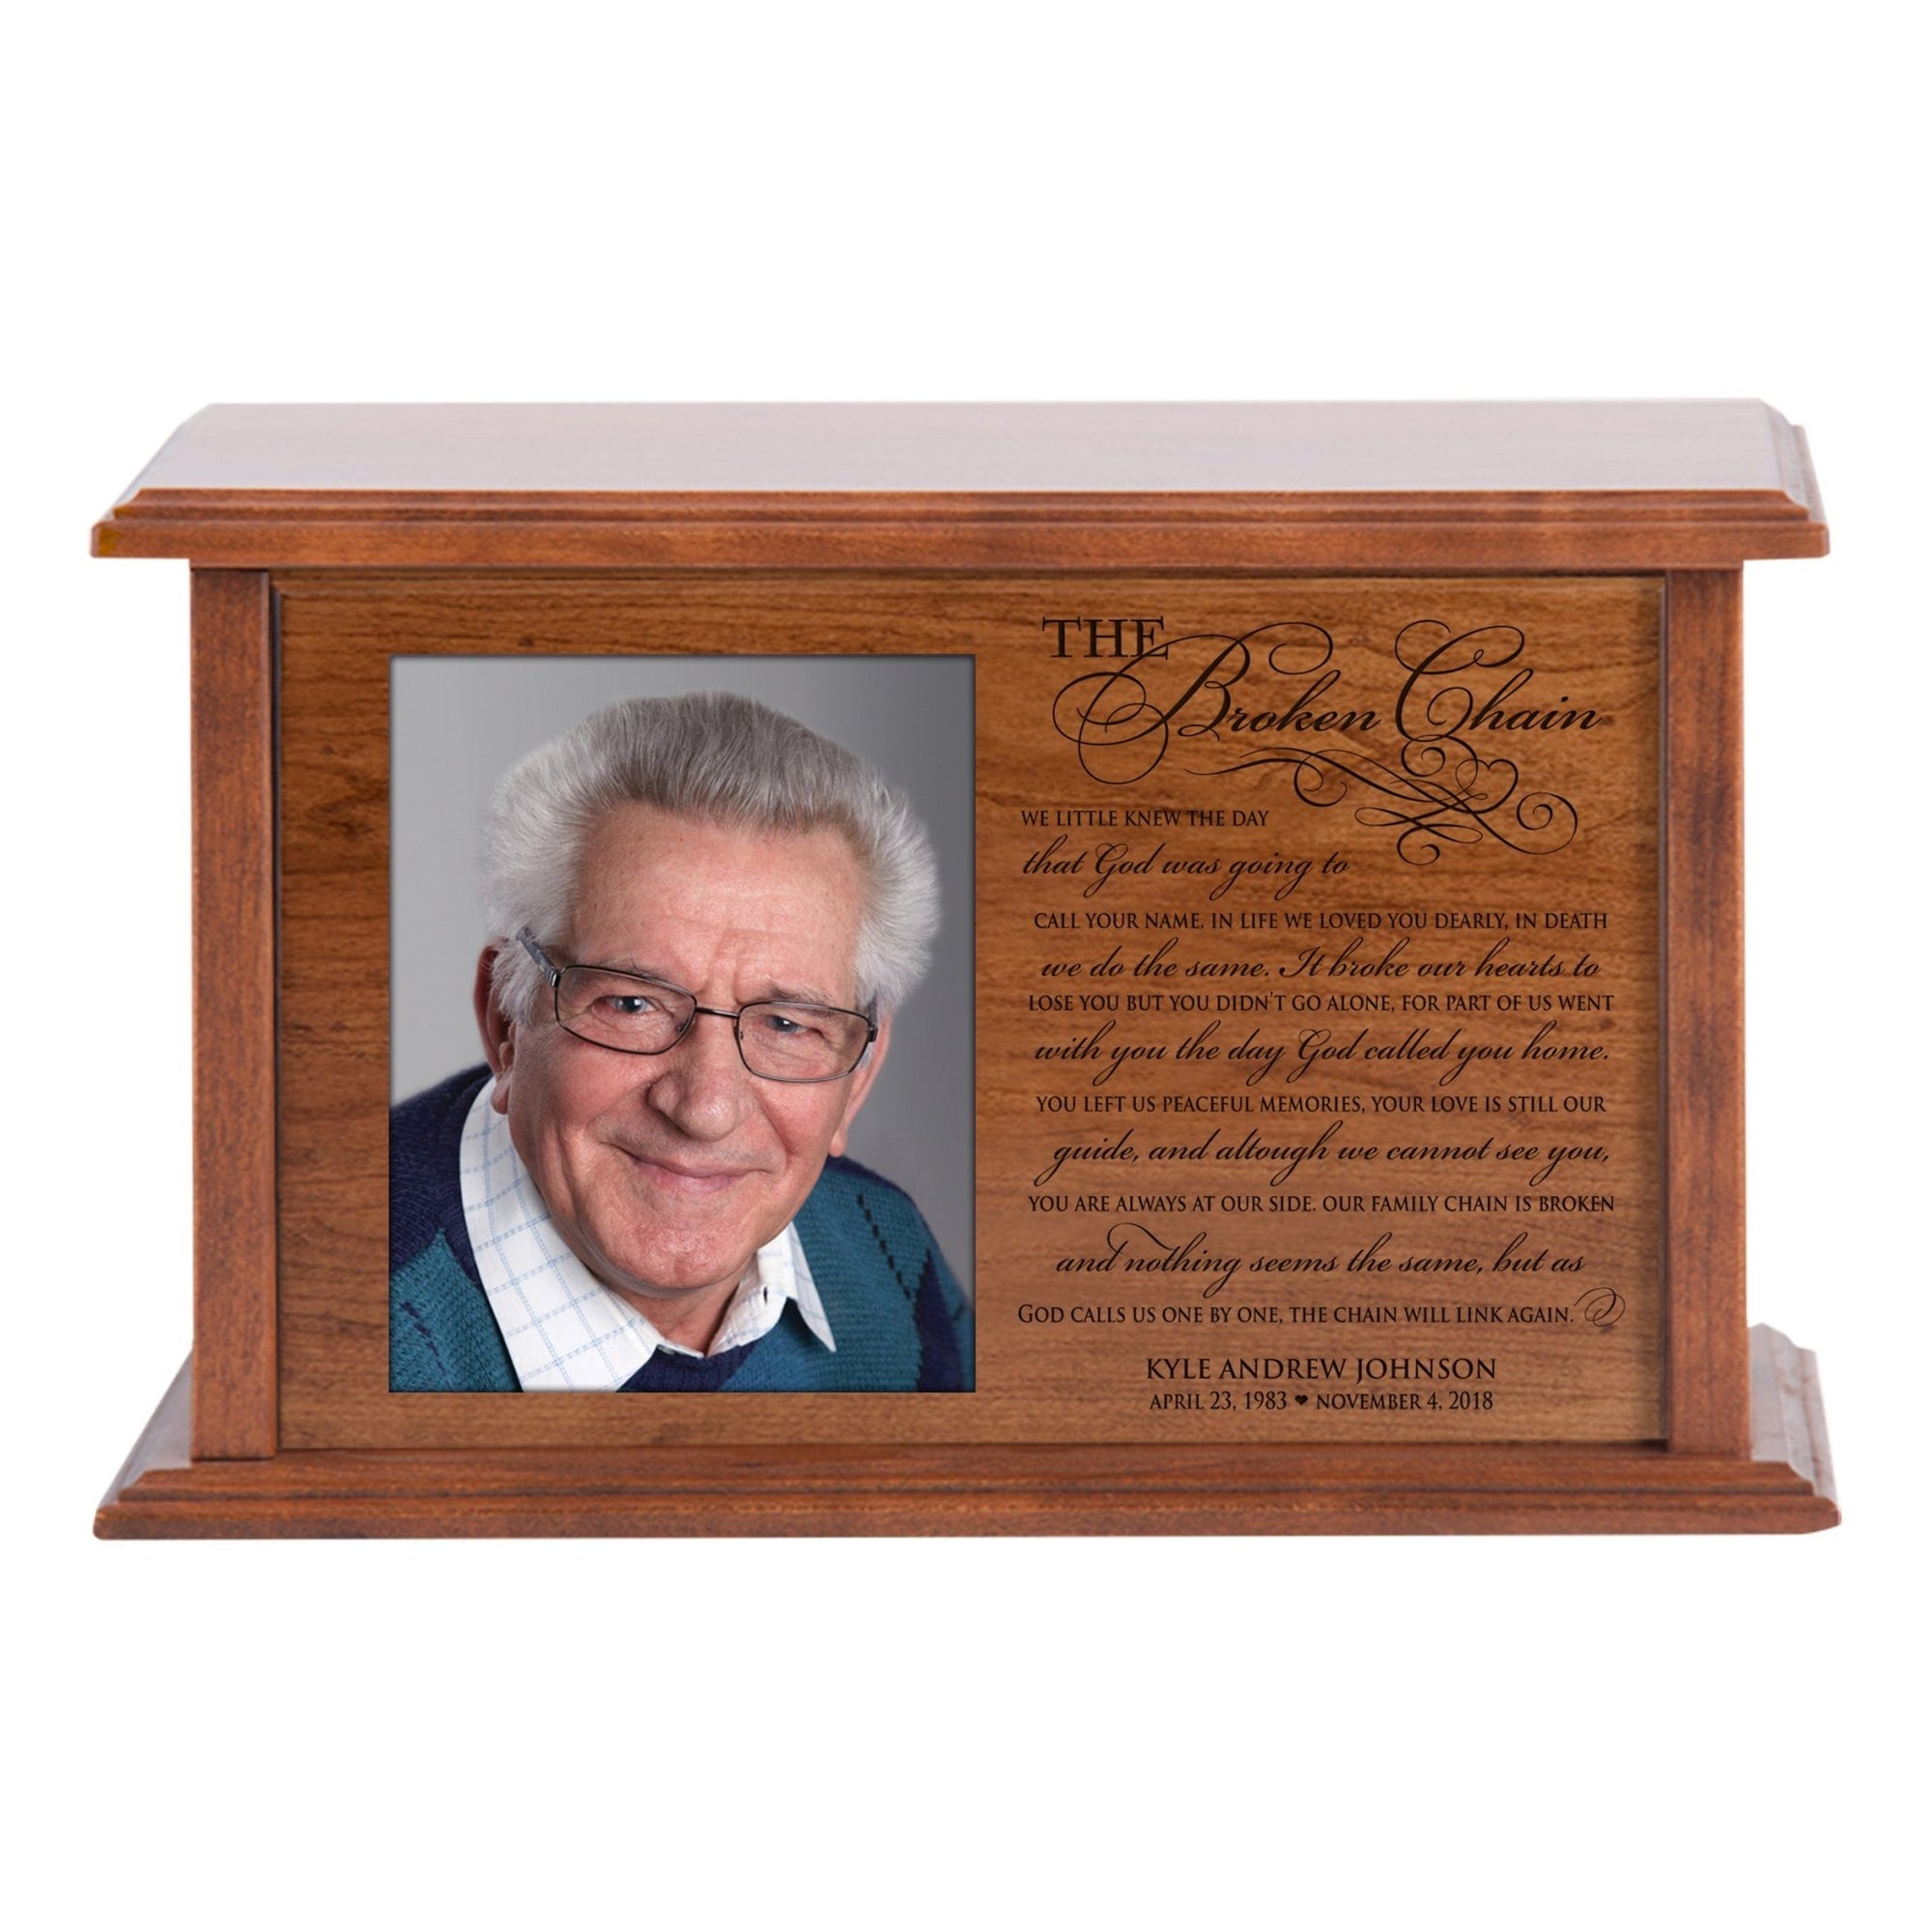 Personalized Memorial Horizontal Cremation Urn For Adult Ashes - The Broken Chain - LifeSong Milestones